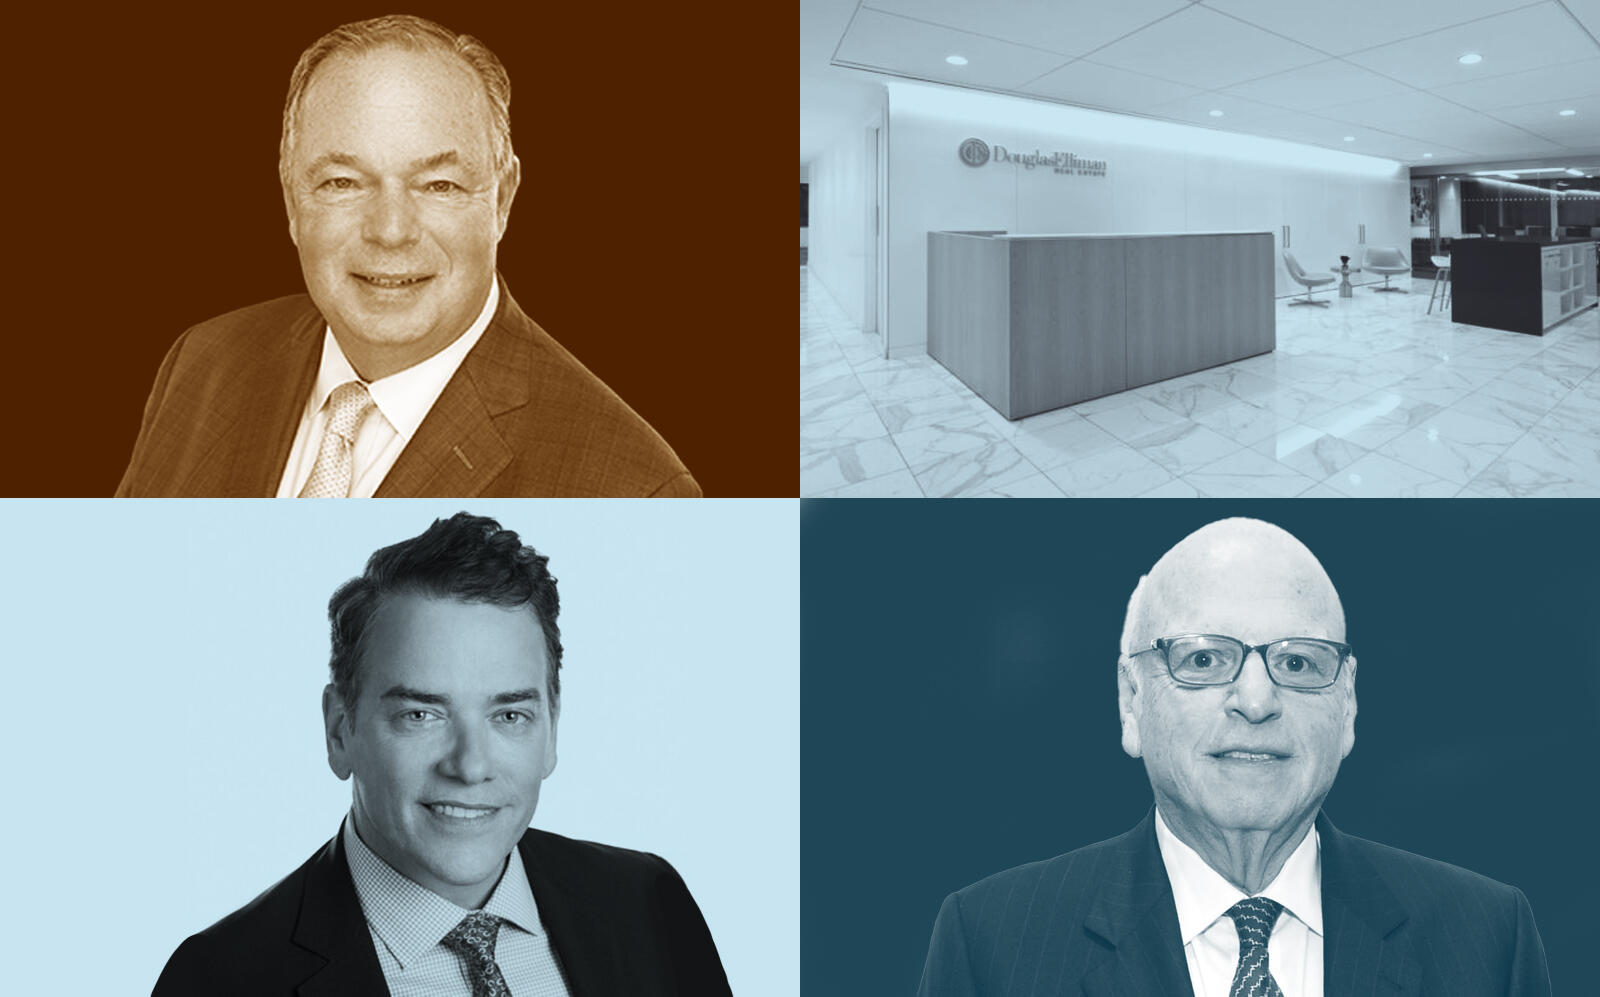 Clockwise from top left: Richard Ferrari, Elliman's flagship NYC office at 575 Madison Avenue, Elliman's Executive Chairman Howard Lorber and Elliman's president and COO Scott Durkin